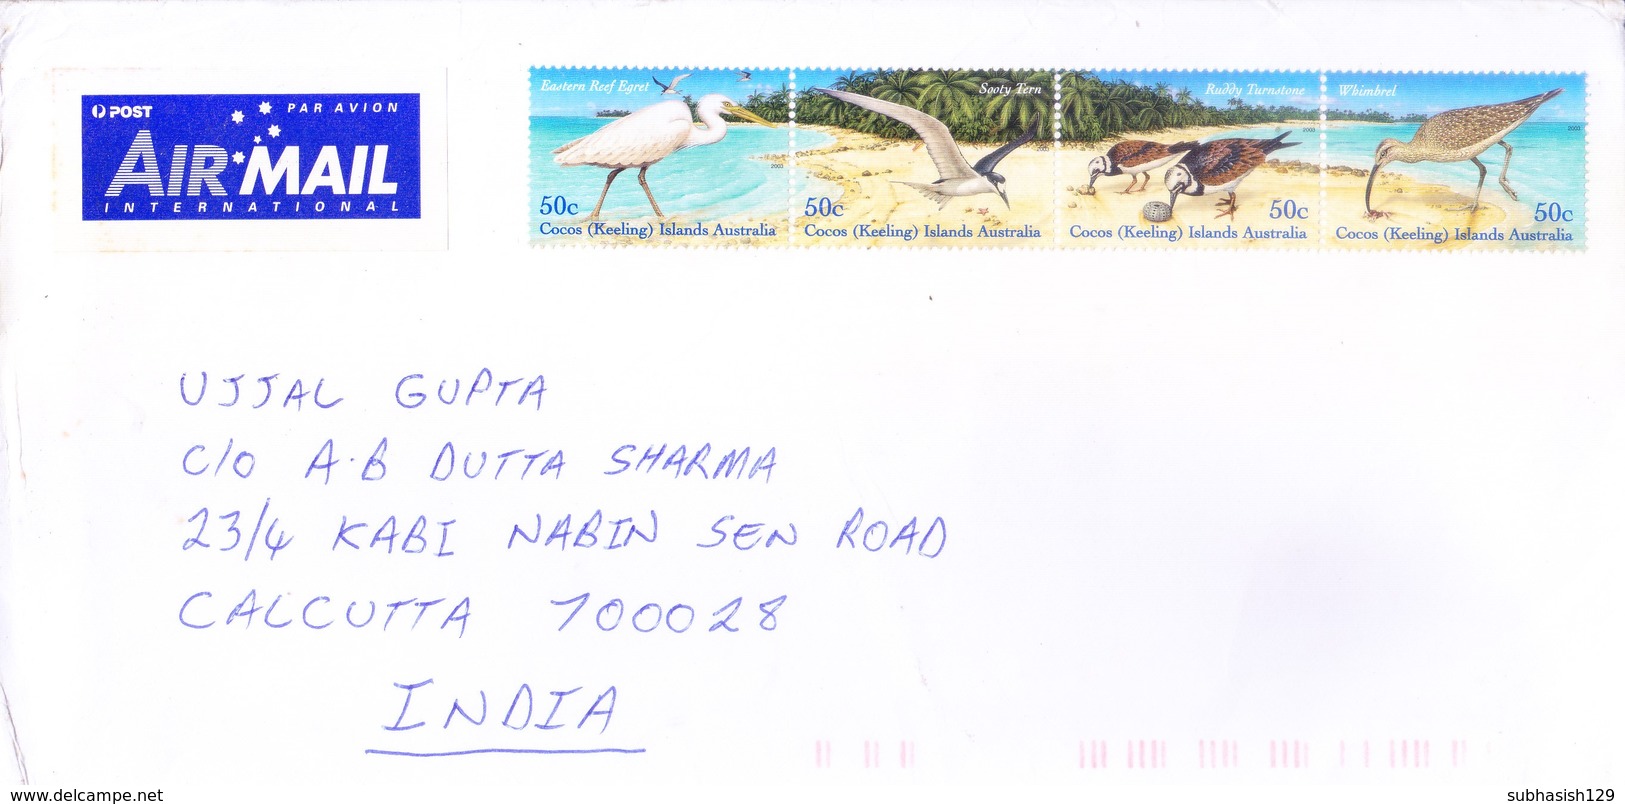 COCOS KEELING ISLAND : 2003 AIRMAIL COVER POSTED FOR INDIA : USE OF BIRD STAMPS, STRIP OF 4v - Cocos (Keeling) Islands